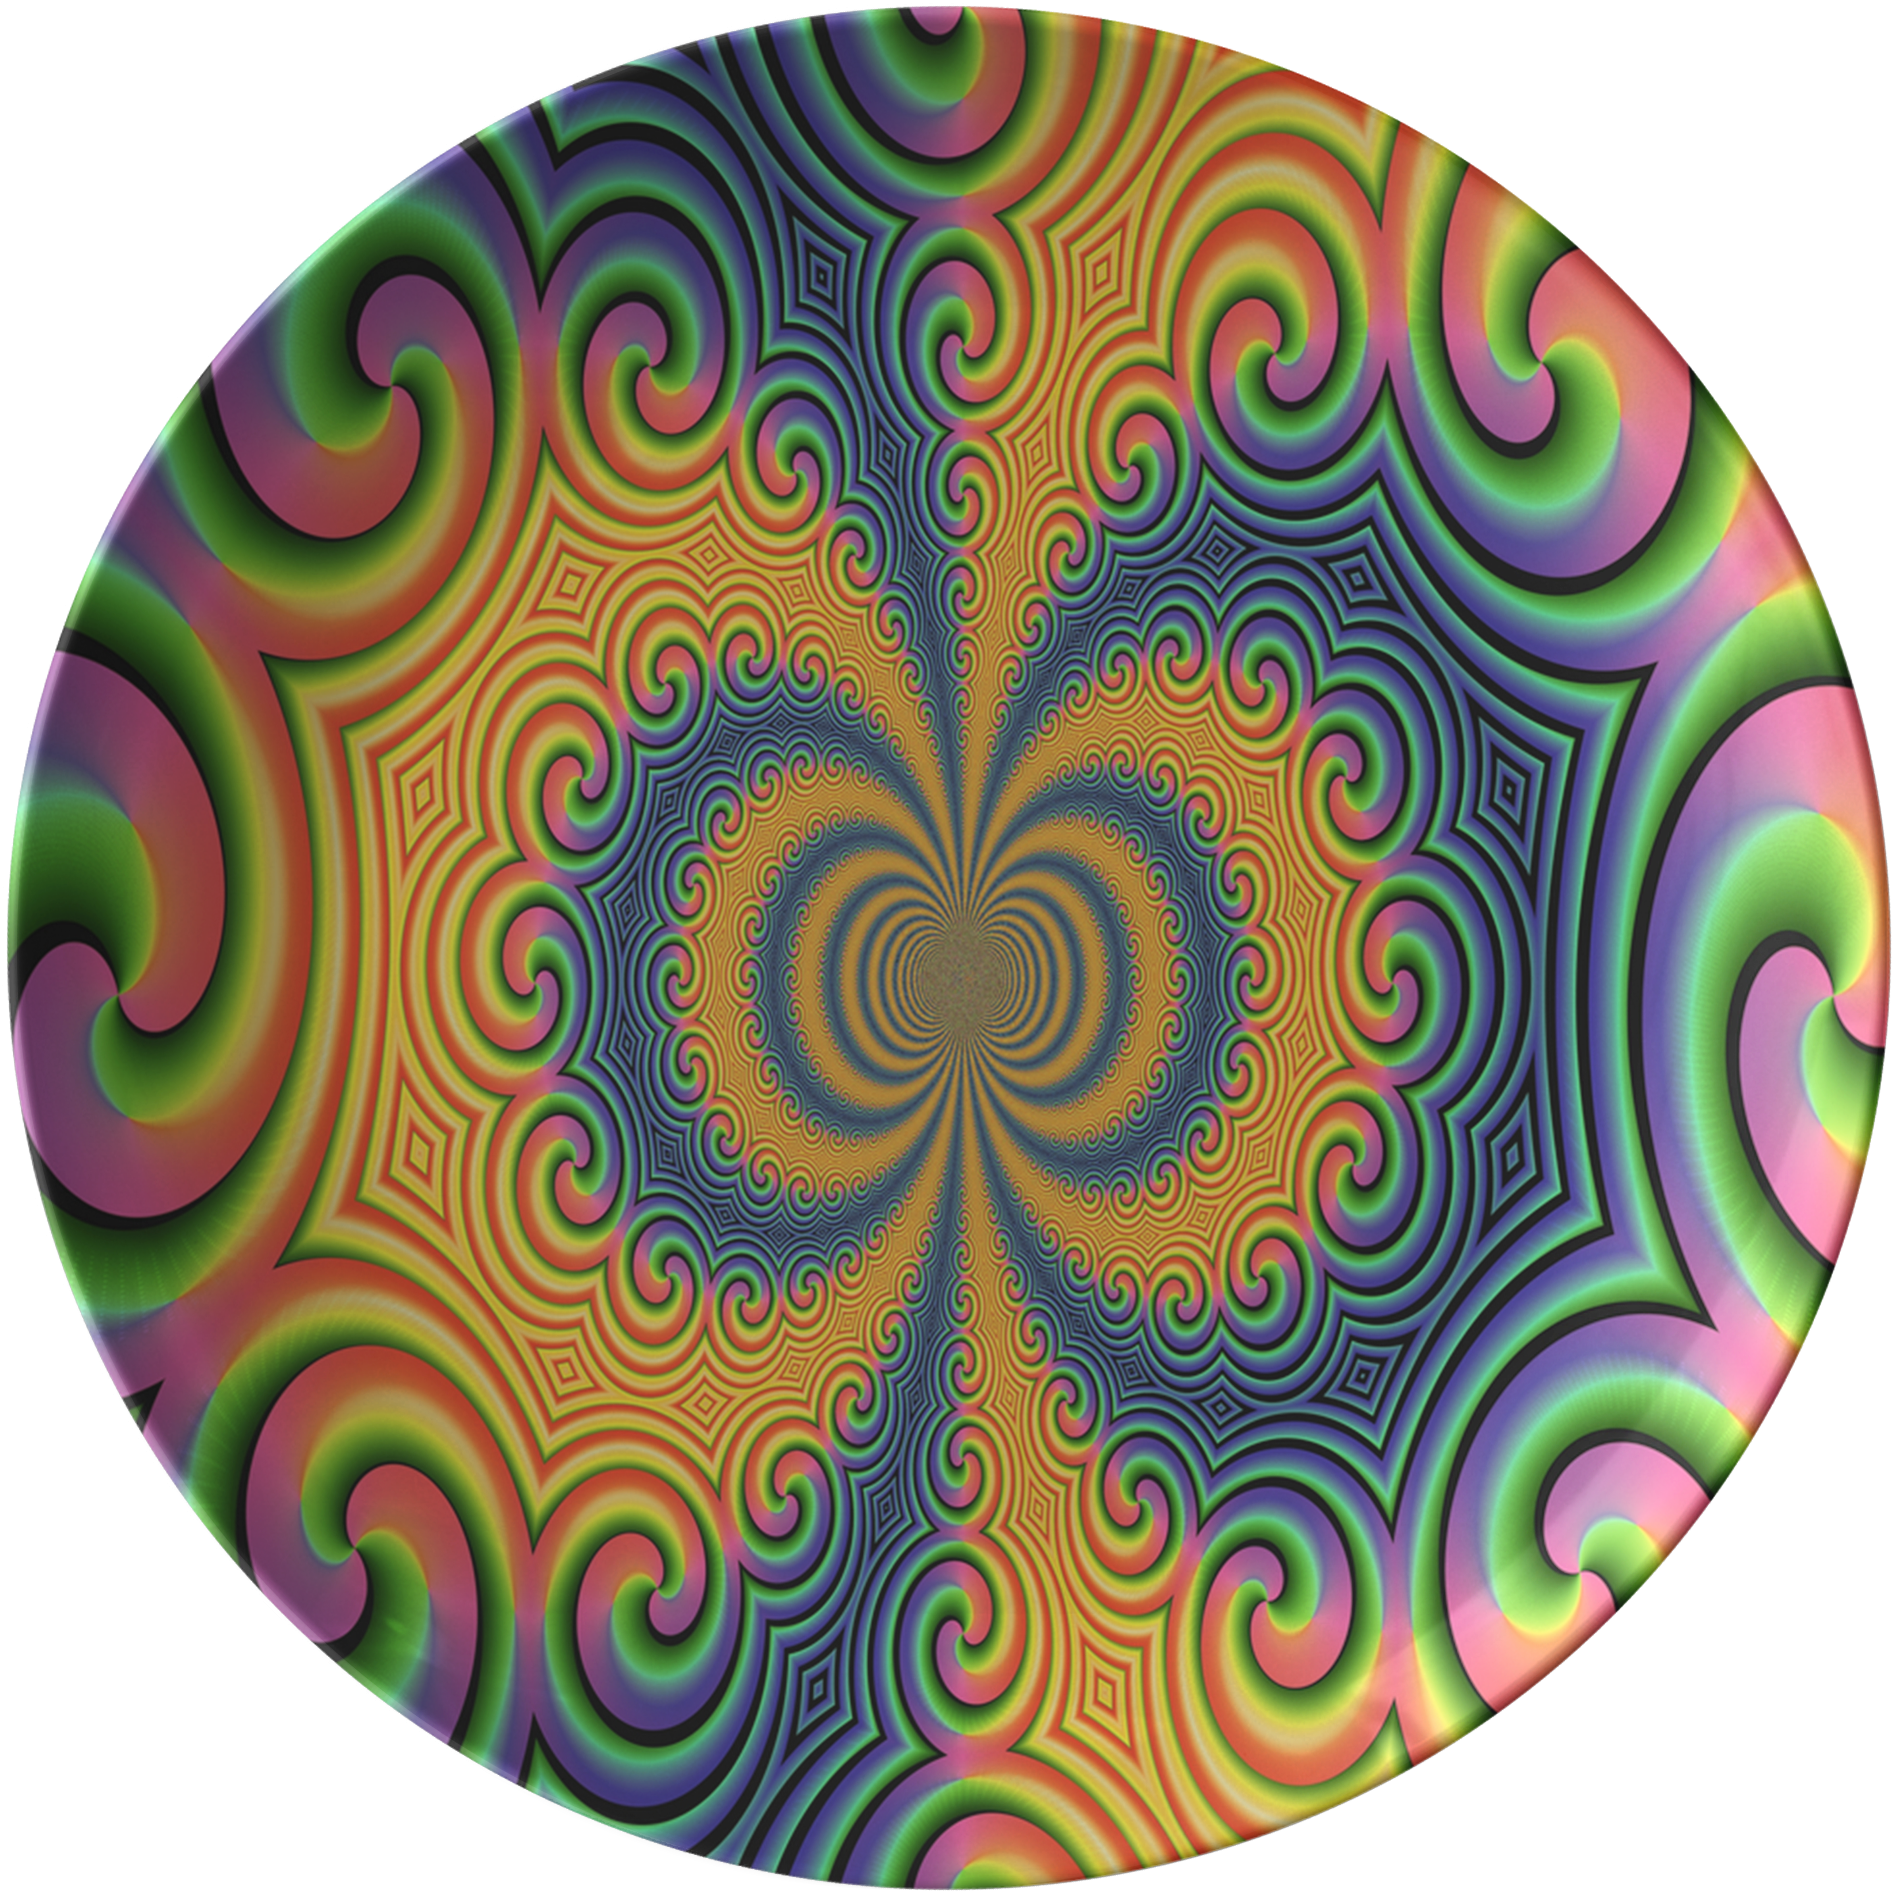 A Circular Object With A Pattern